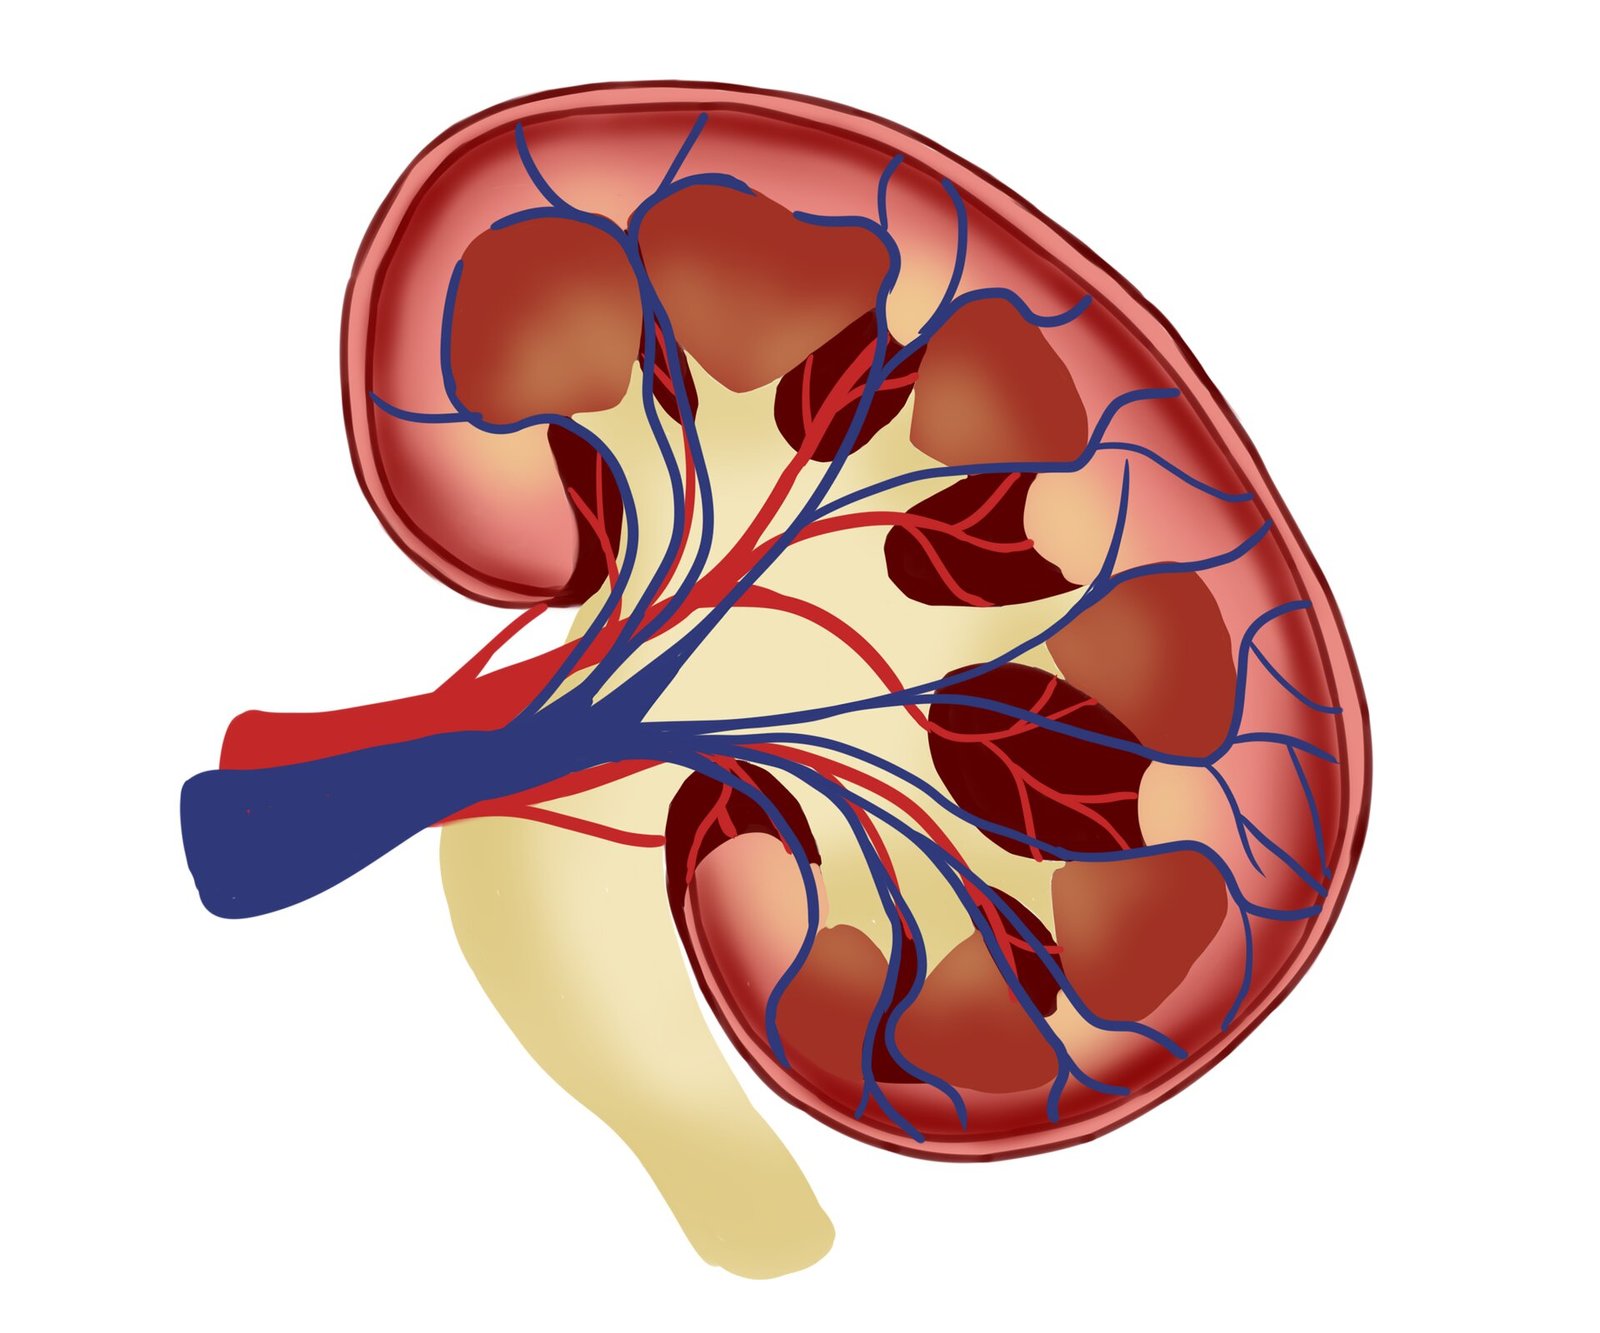 Immunotherapy post surgery found to improve overall survival for kidney cancer